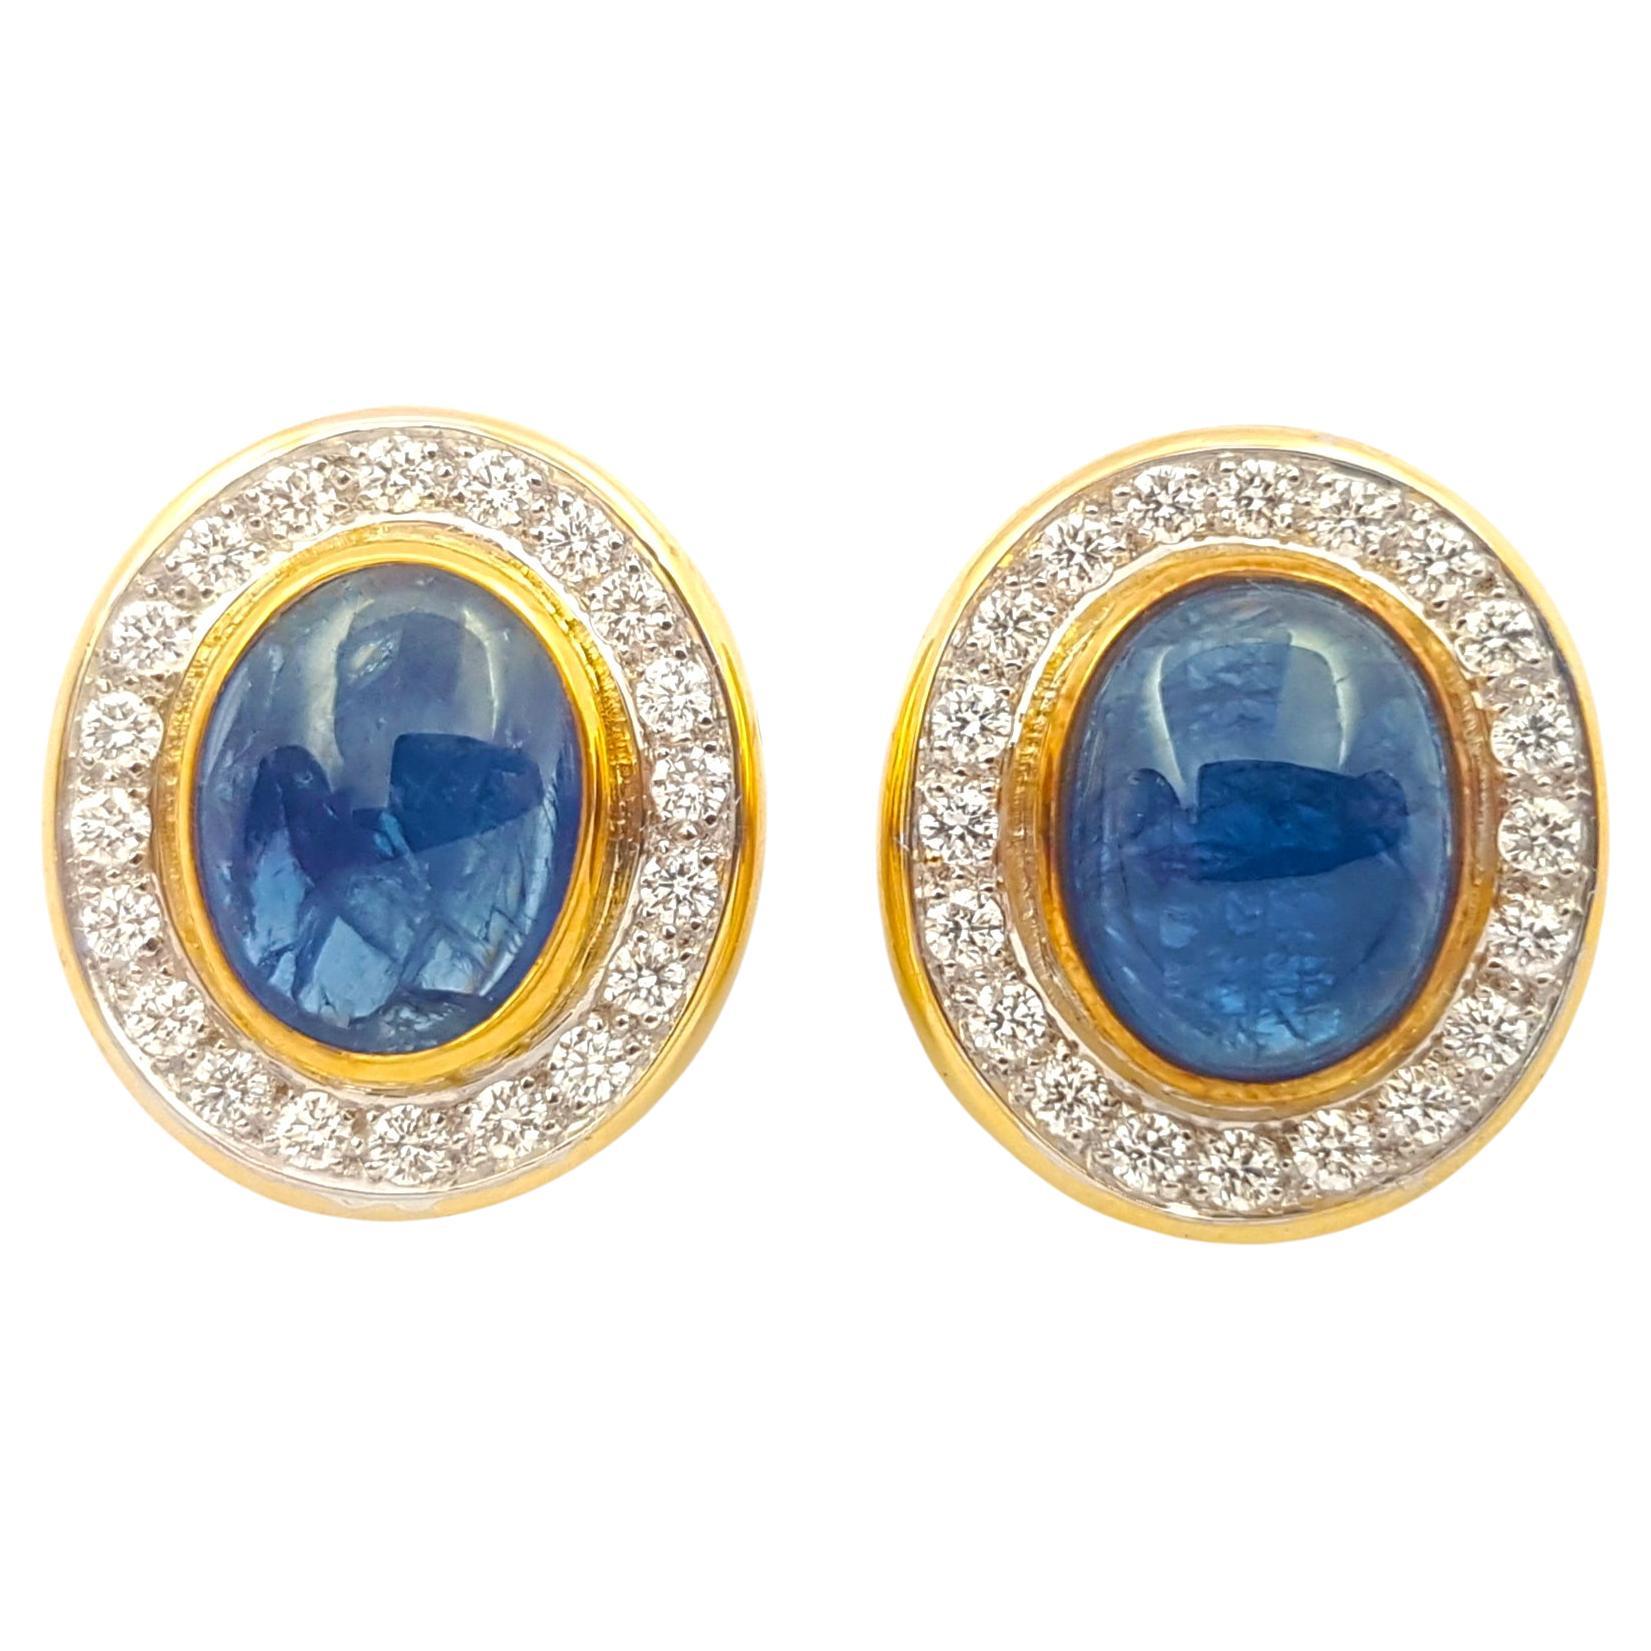 Cabochon Blue Sapphire with Diamond Earrings set in 18K Gold Settings